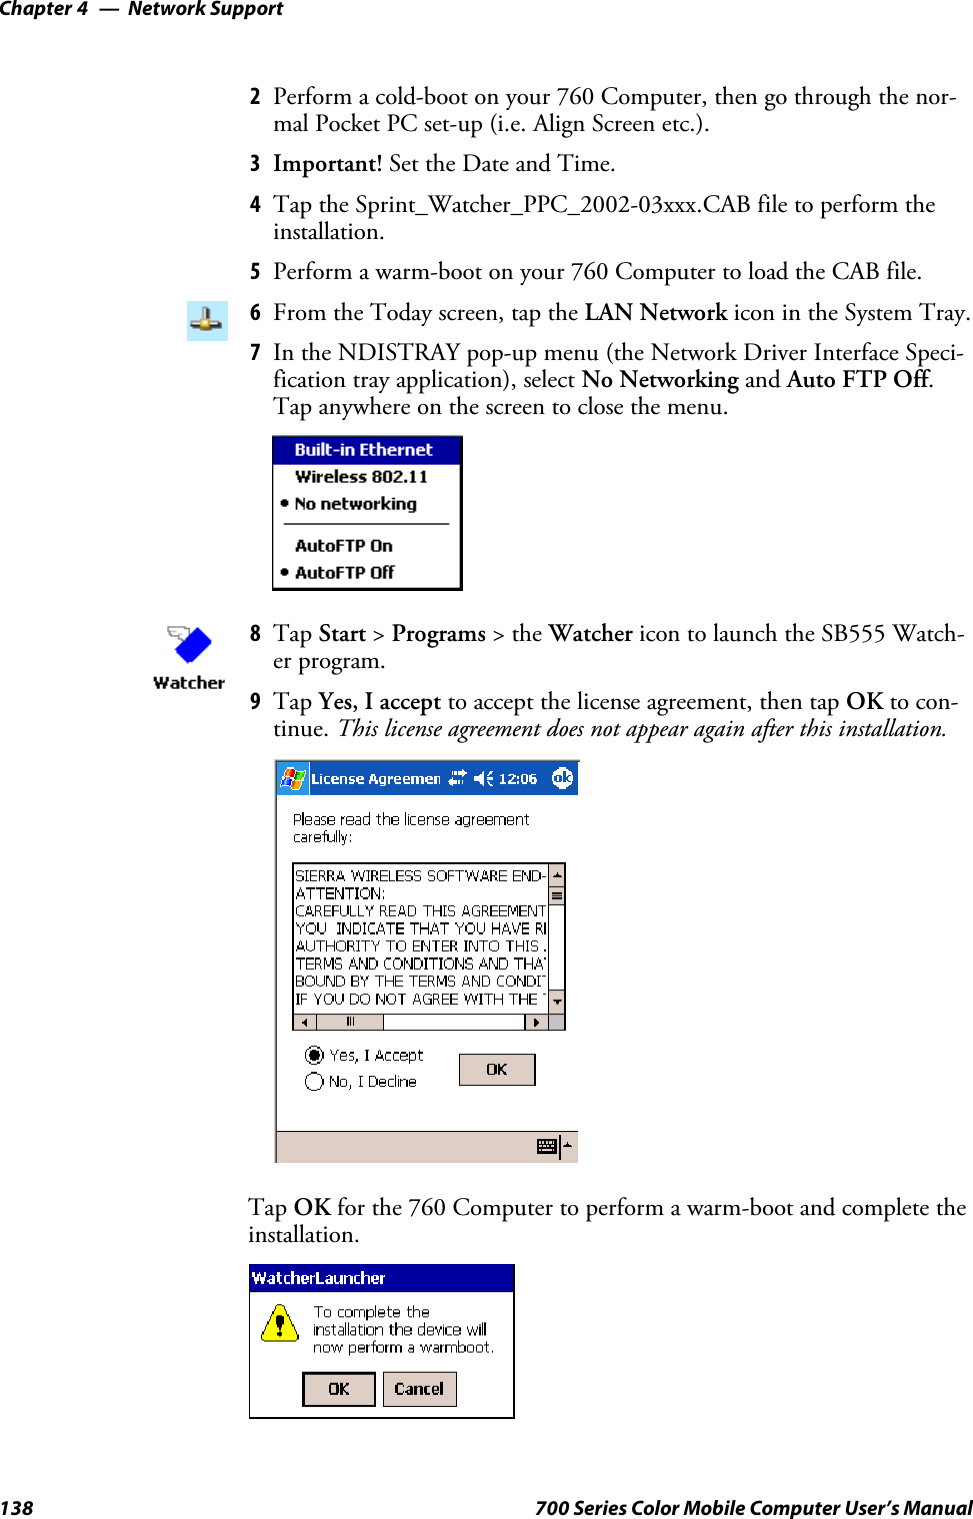 Network SupportChapter —4138 700 Series Color Mobile Computer User’s Manual2Perform a cold-boot on your 760 Computer, then go through the nor-mal Pocket PC set-up (i.e. Align Screen etc.).3Important! Set the Date and Time.4Tap the Sprint_Watcher_PPC_2002-03xxx.CAB file to perform theinstallation.5Perform a warm-boot on your 760 Computer to load the CAB file.6From the Today screen, tap the LAN Network icon in the System Tray.7In the NDISTRAY pop-up menu (the Network Driver Interface Speci-fication tray application), select No Networking and Auto FTP Off.Tap anywhere on the screen to close the menu.8Tap Start &gt;Programs &gt;theWatcher icon to launch the SB555 Watch-er program.9Tap Yes, I accept to accept the license agreement, then tap OK to con-tinue. This license agreement does not appear again after this installation.Tap OK for the 760 Computer to perform a warm-boot and complete theinstallation.